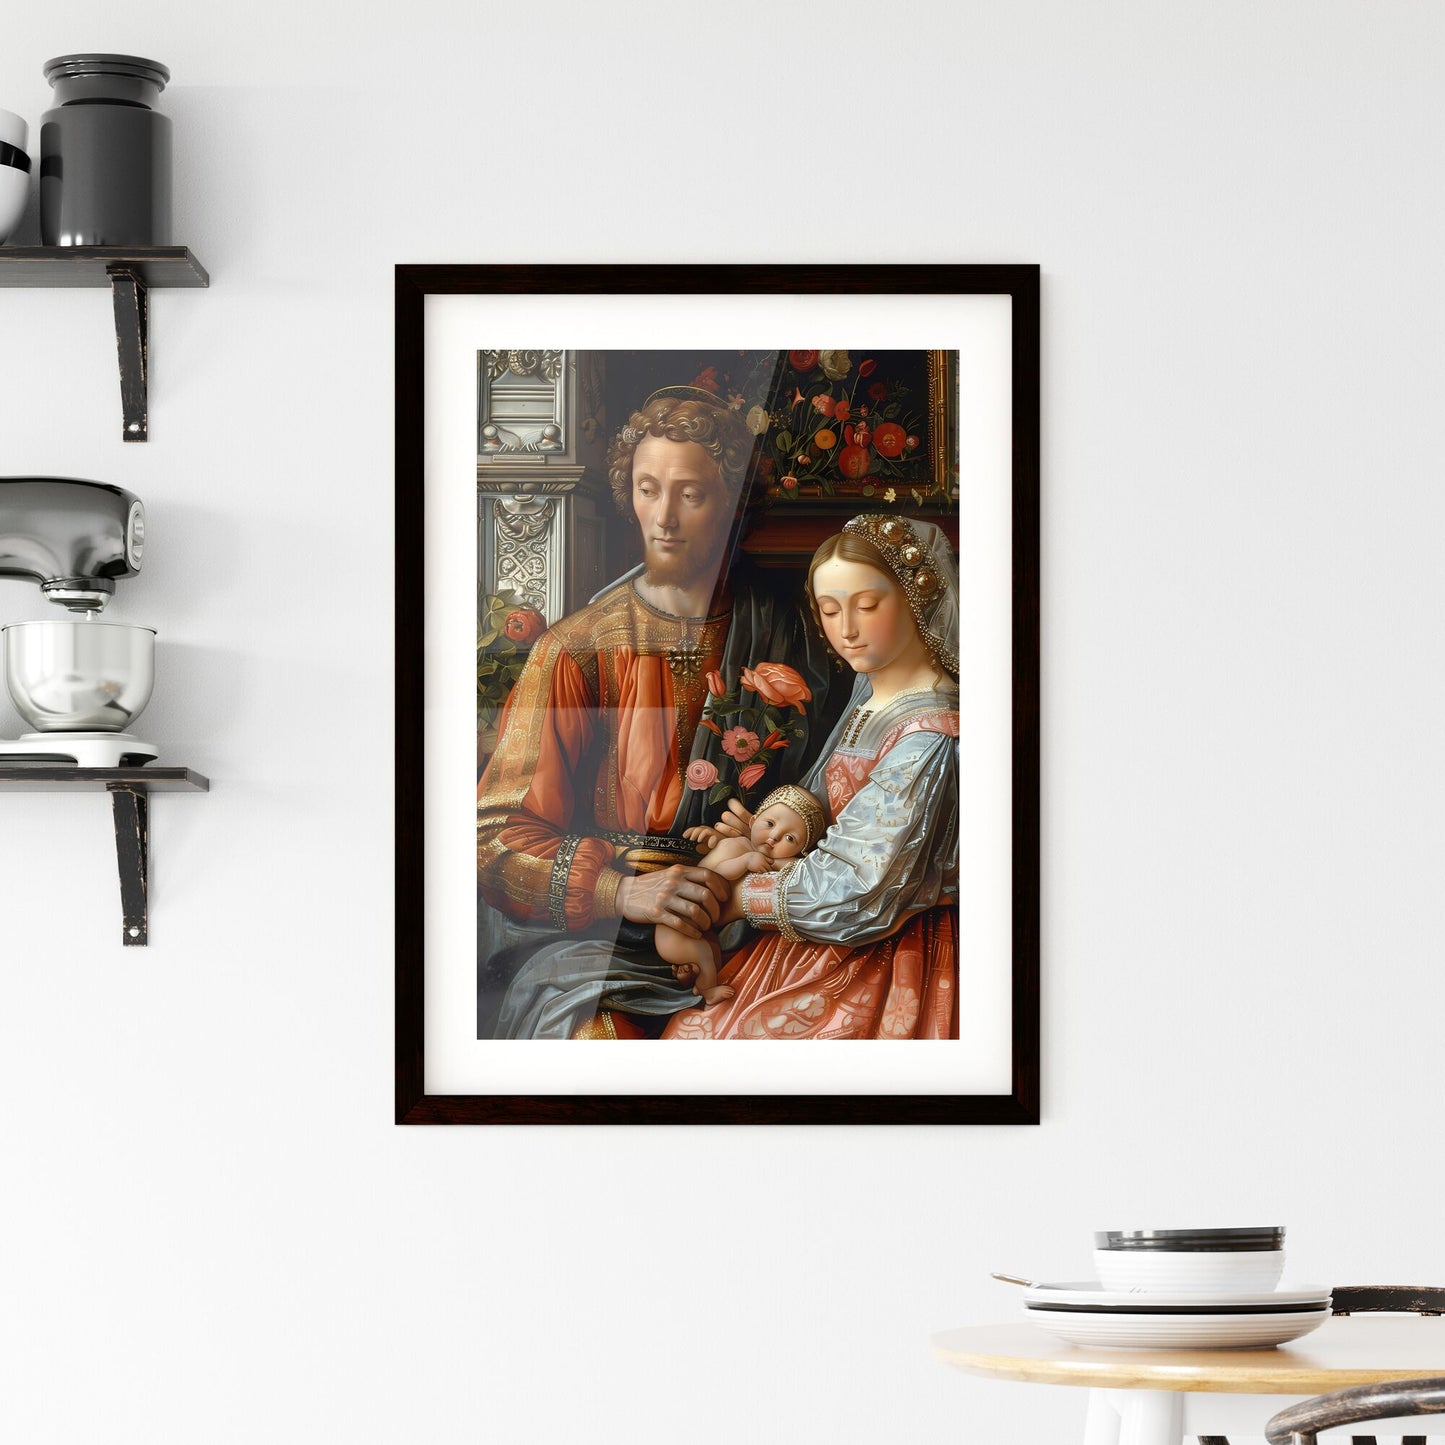 Renaissance Art Print: Family Portrait Painting with Man, Woman, and Baby Default Title